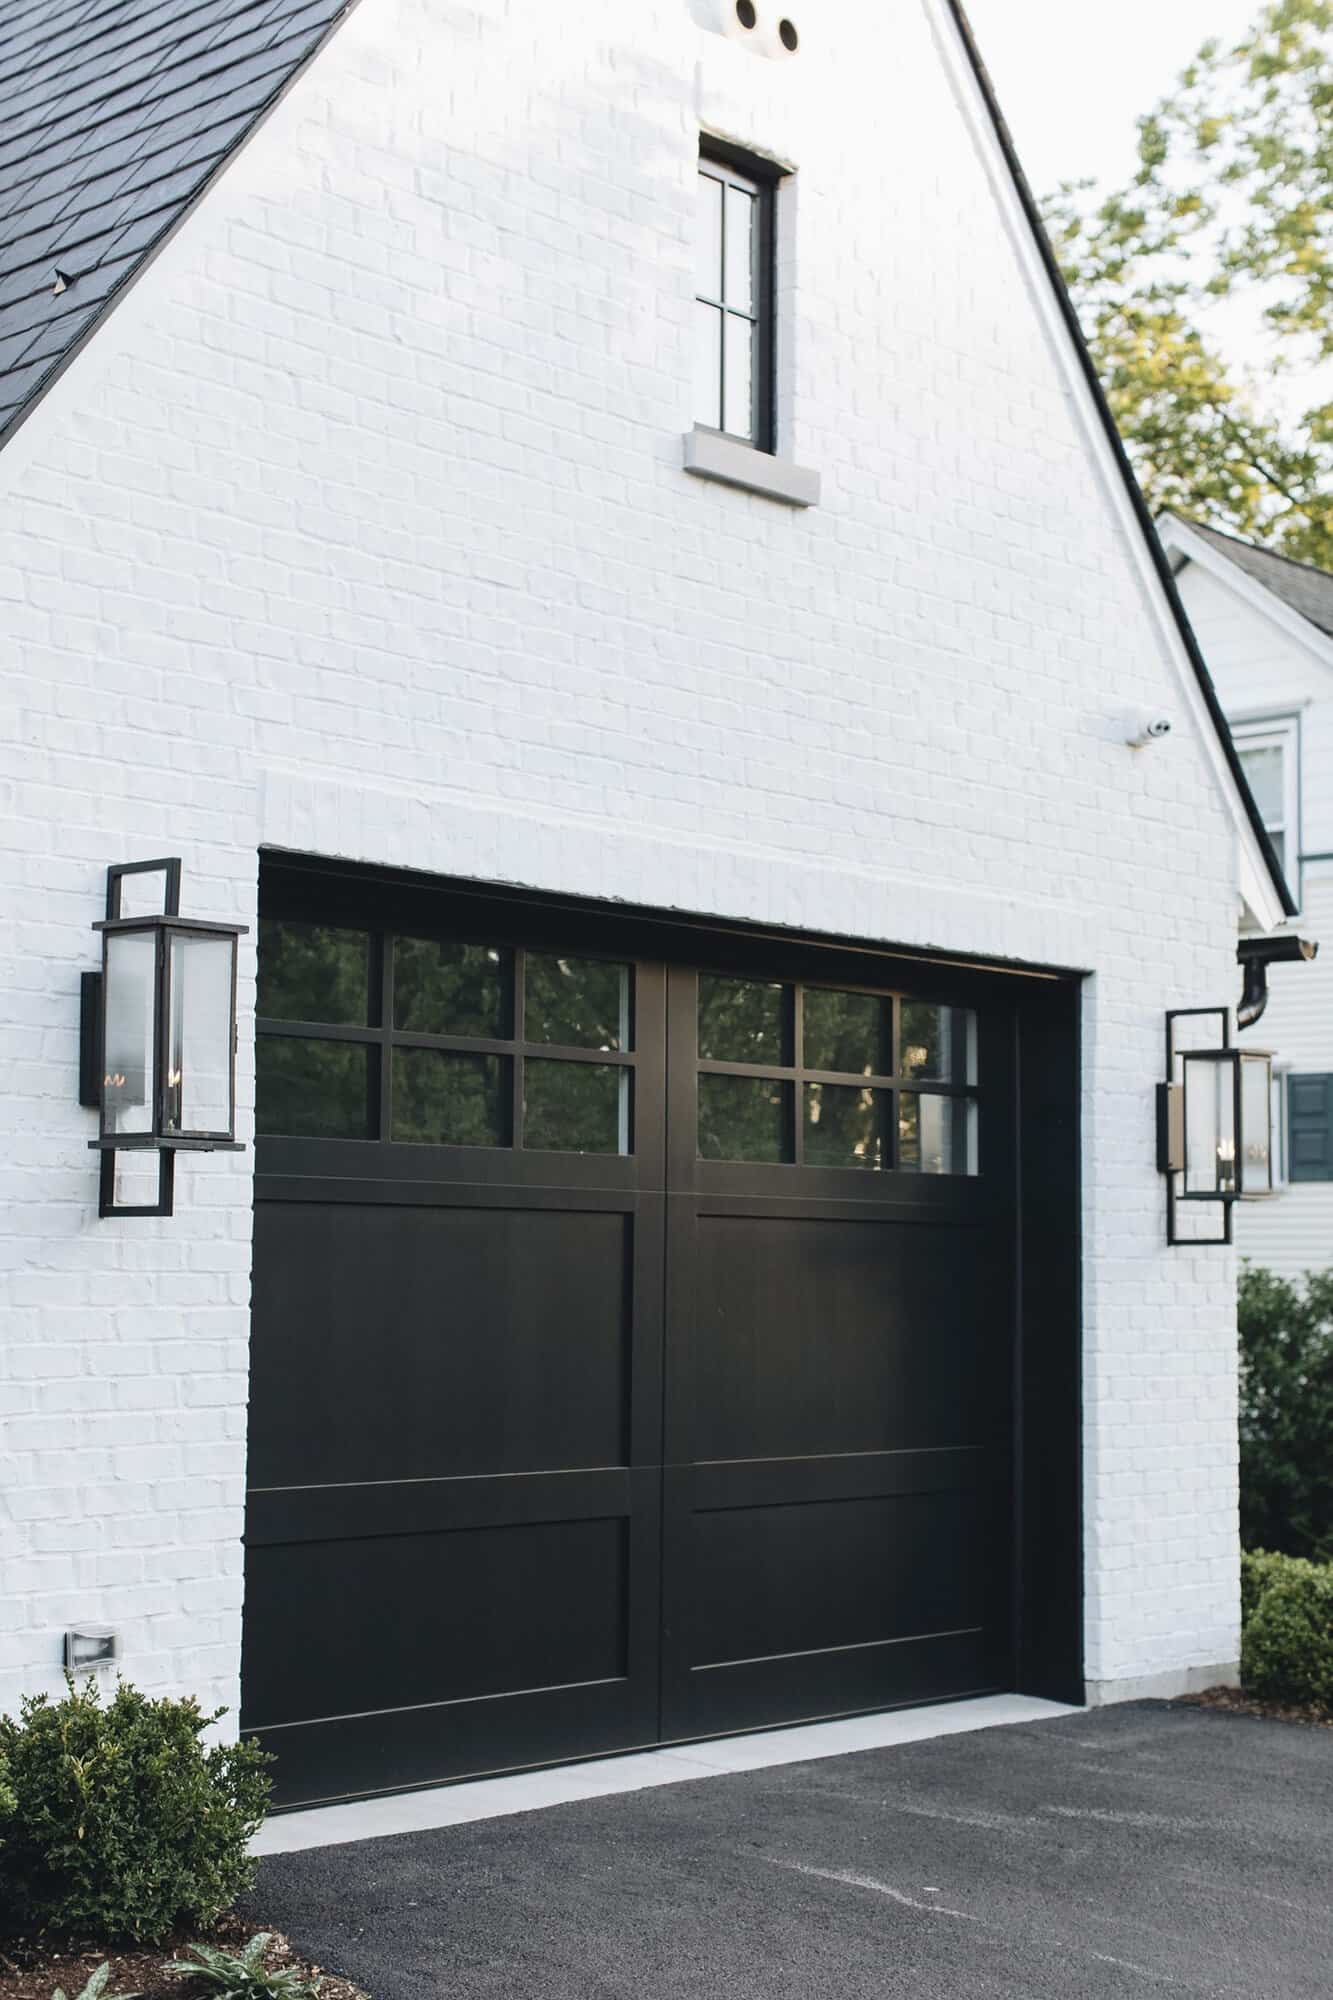 transitional-style-home-garage